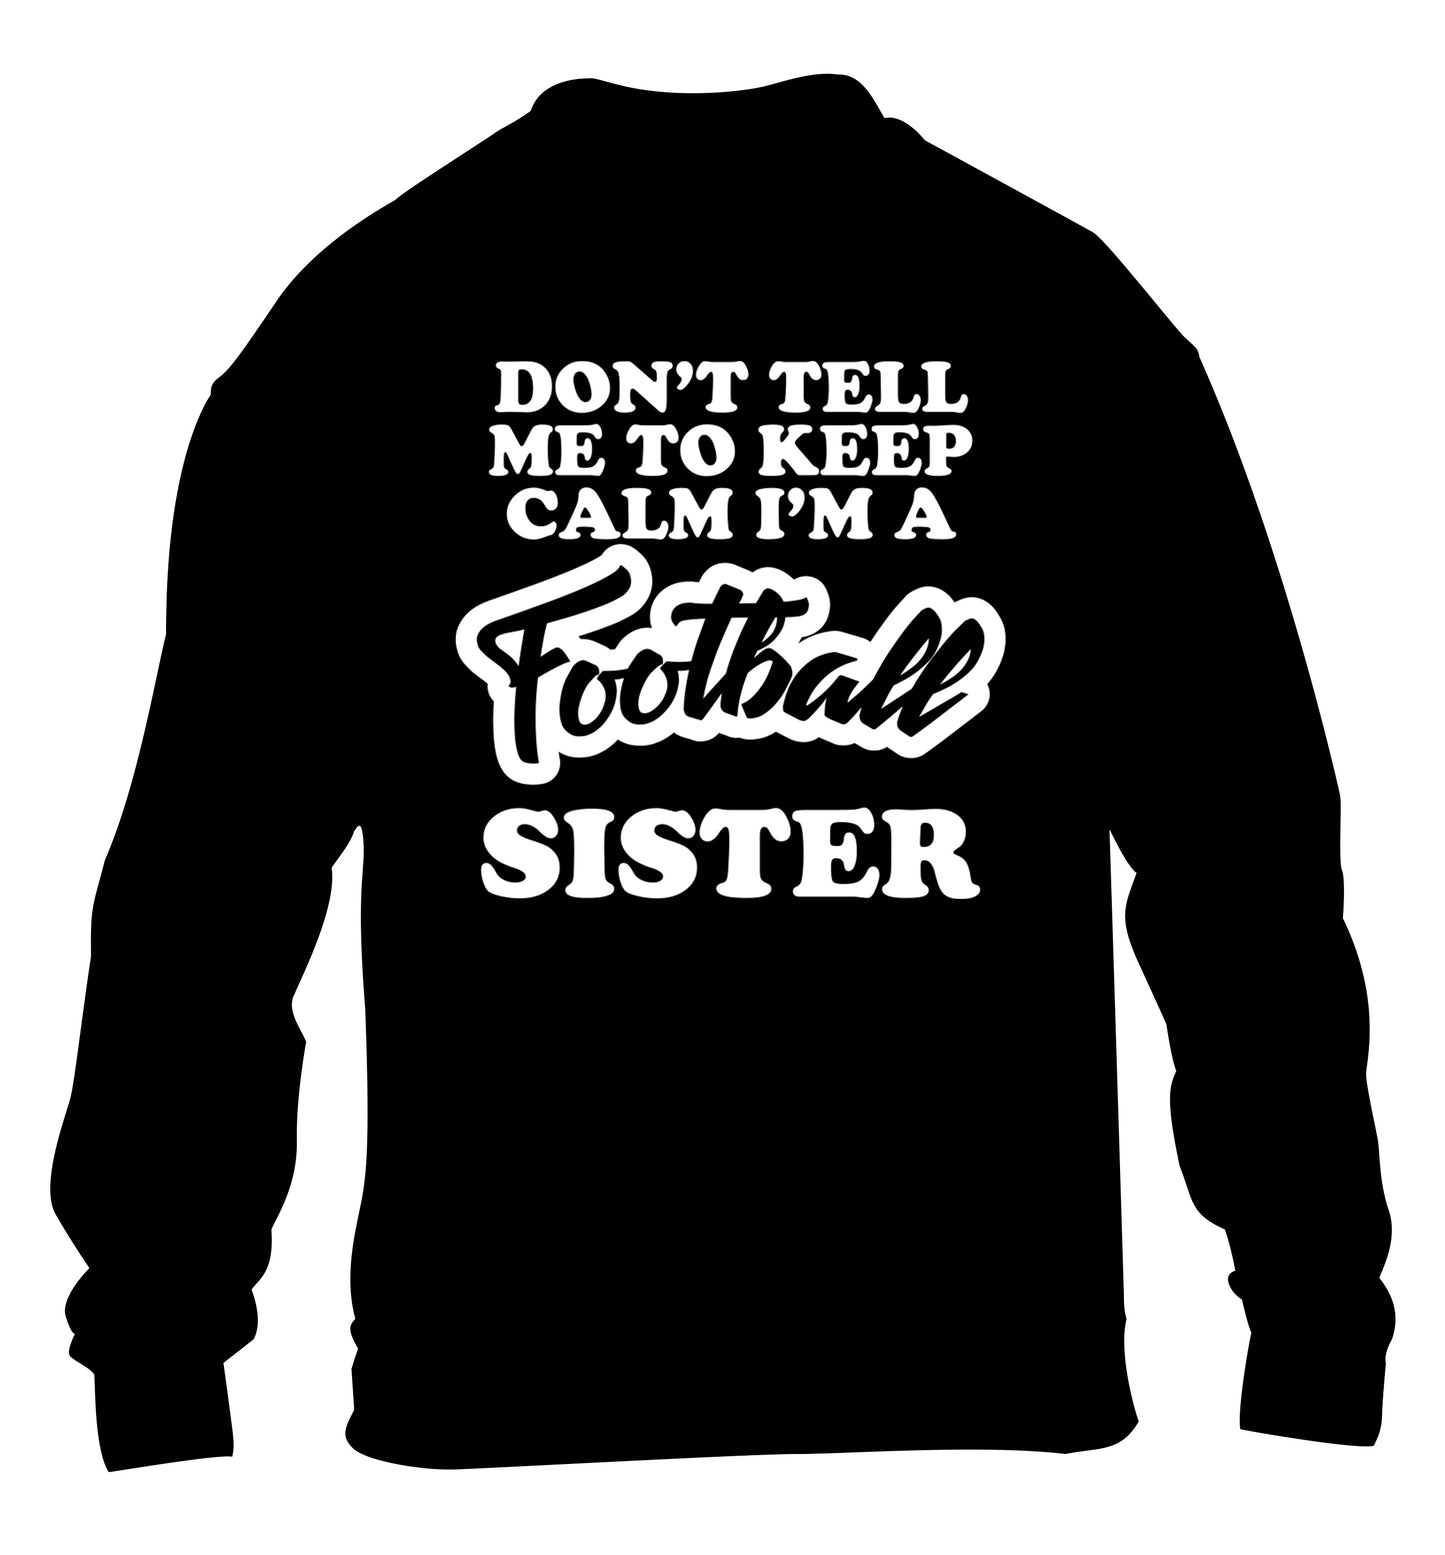 Don't tell me to keep calm I'm a football sister children's black sweater 12-14 Years